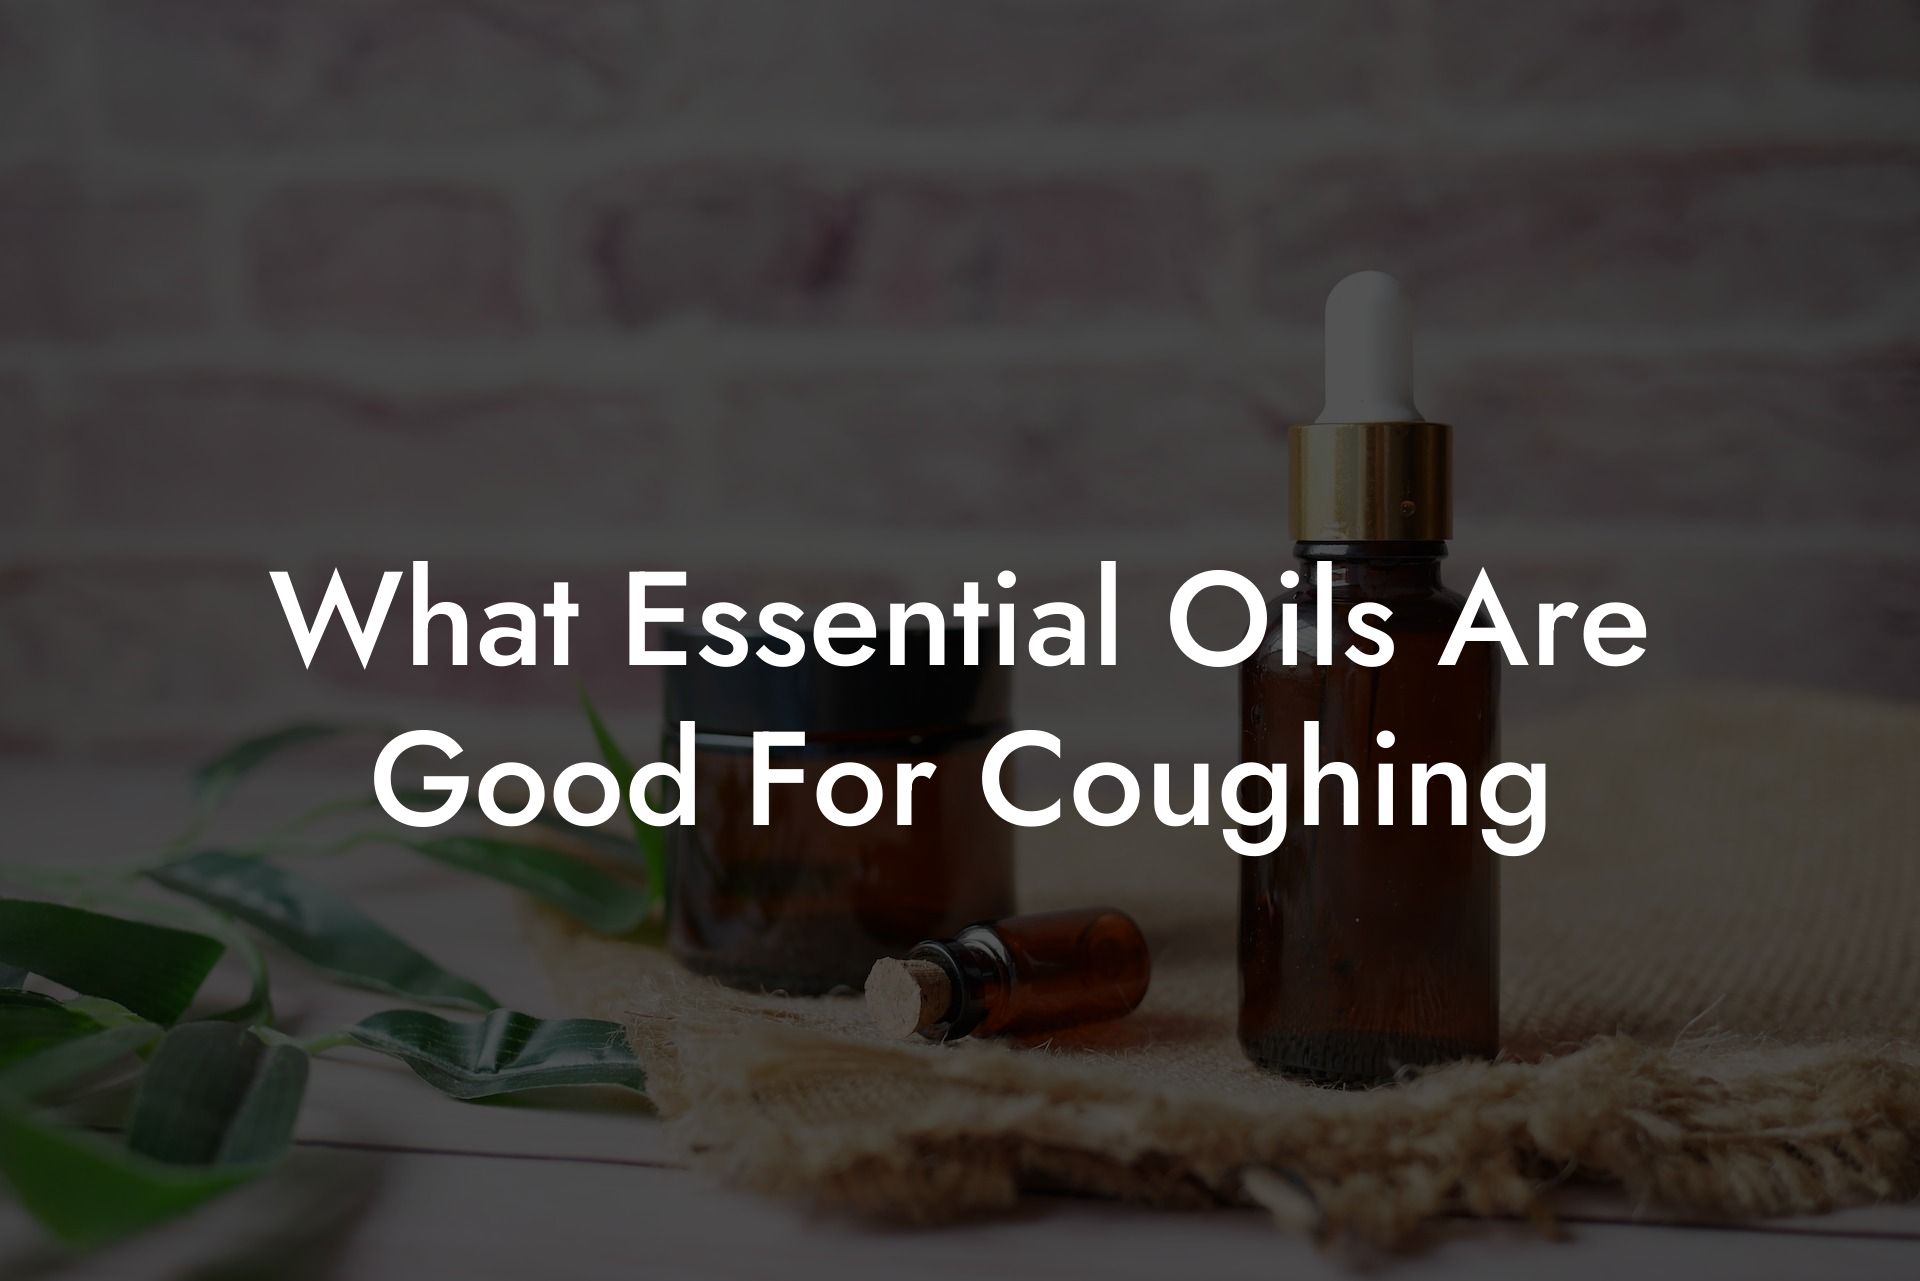 What Essential Oils Are Good For Coughing